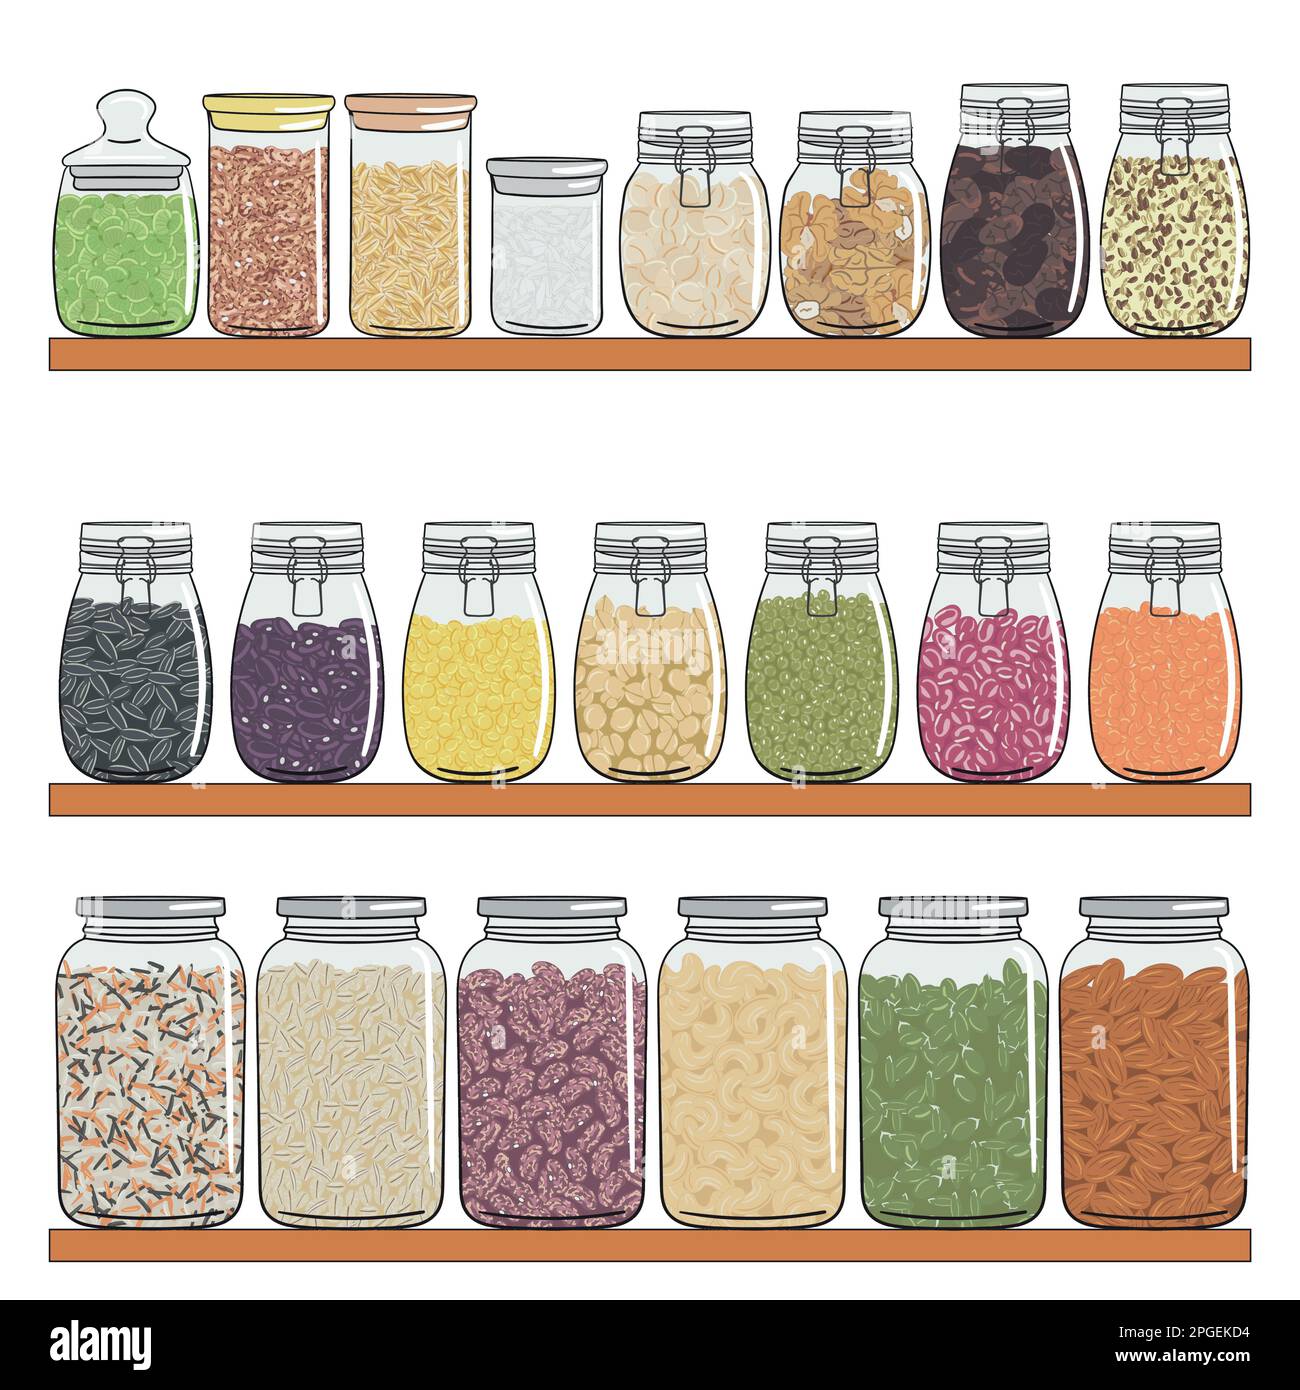 Set of different types of jars with grains, nuts, seeds beans on shelf. Elements of kitchen storage. Zero waste, no plastic concept. Hand drawn vector Stock Vector